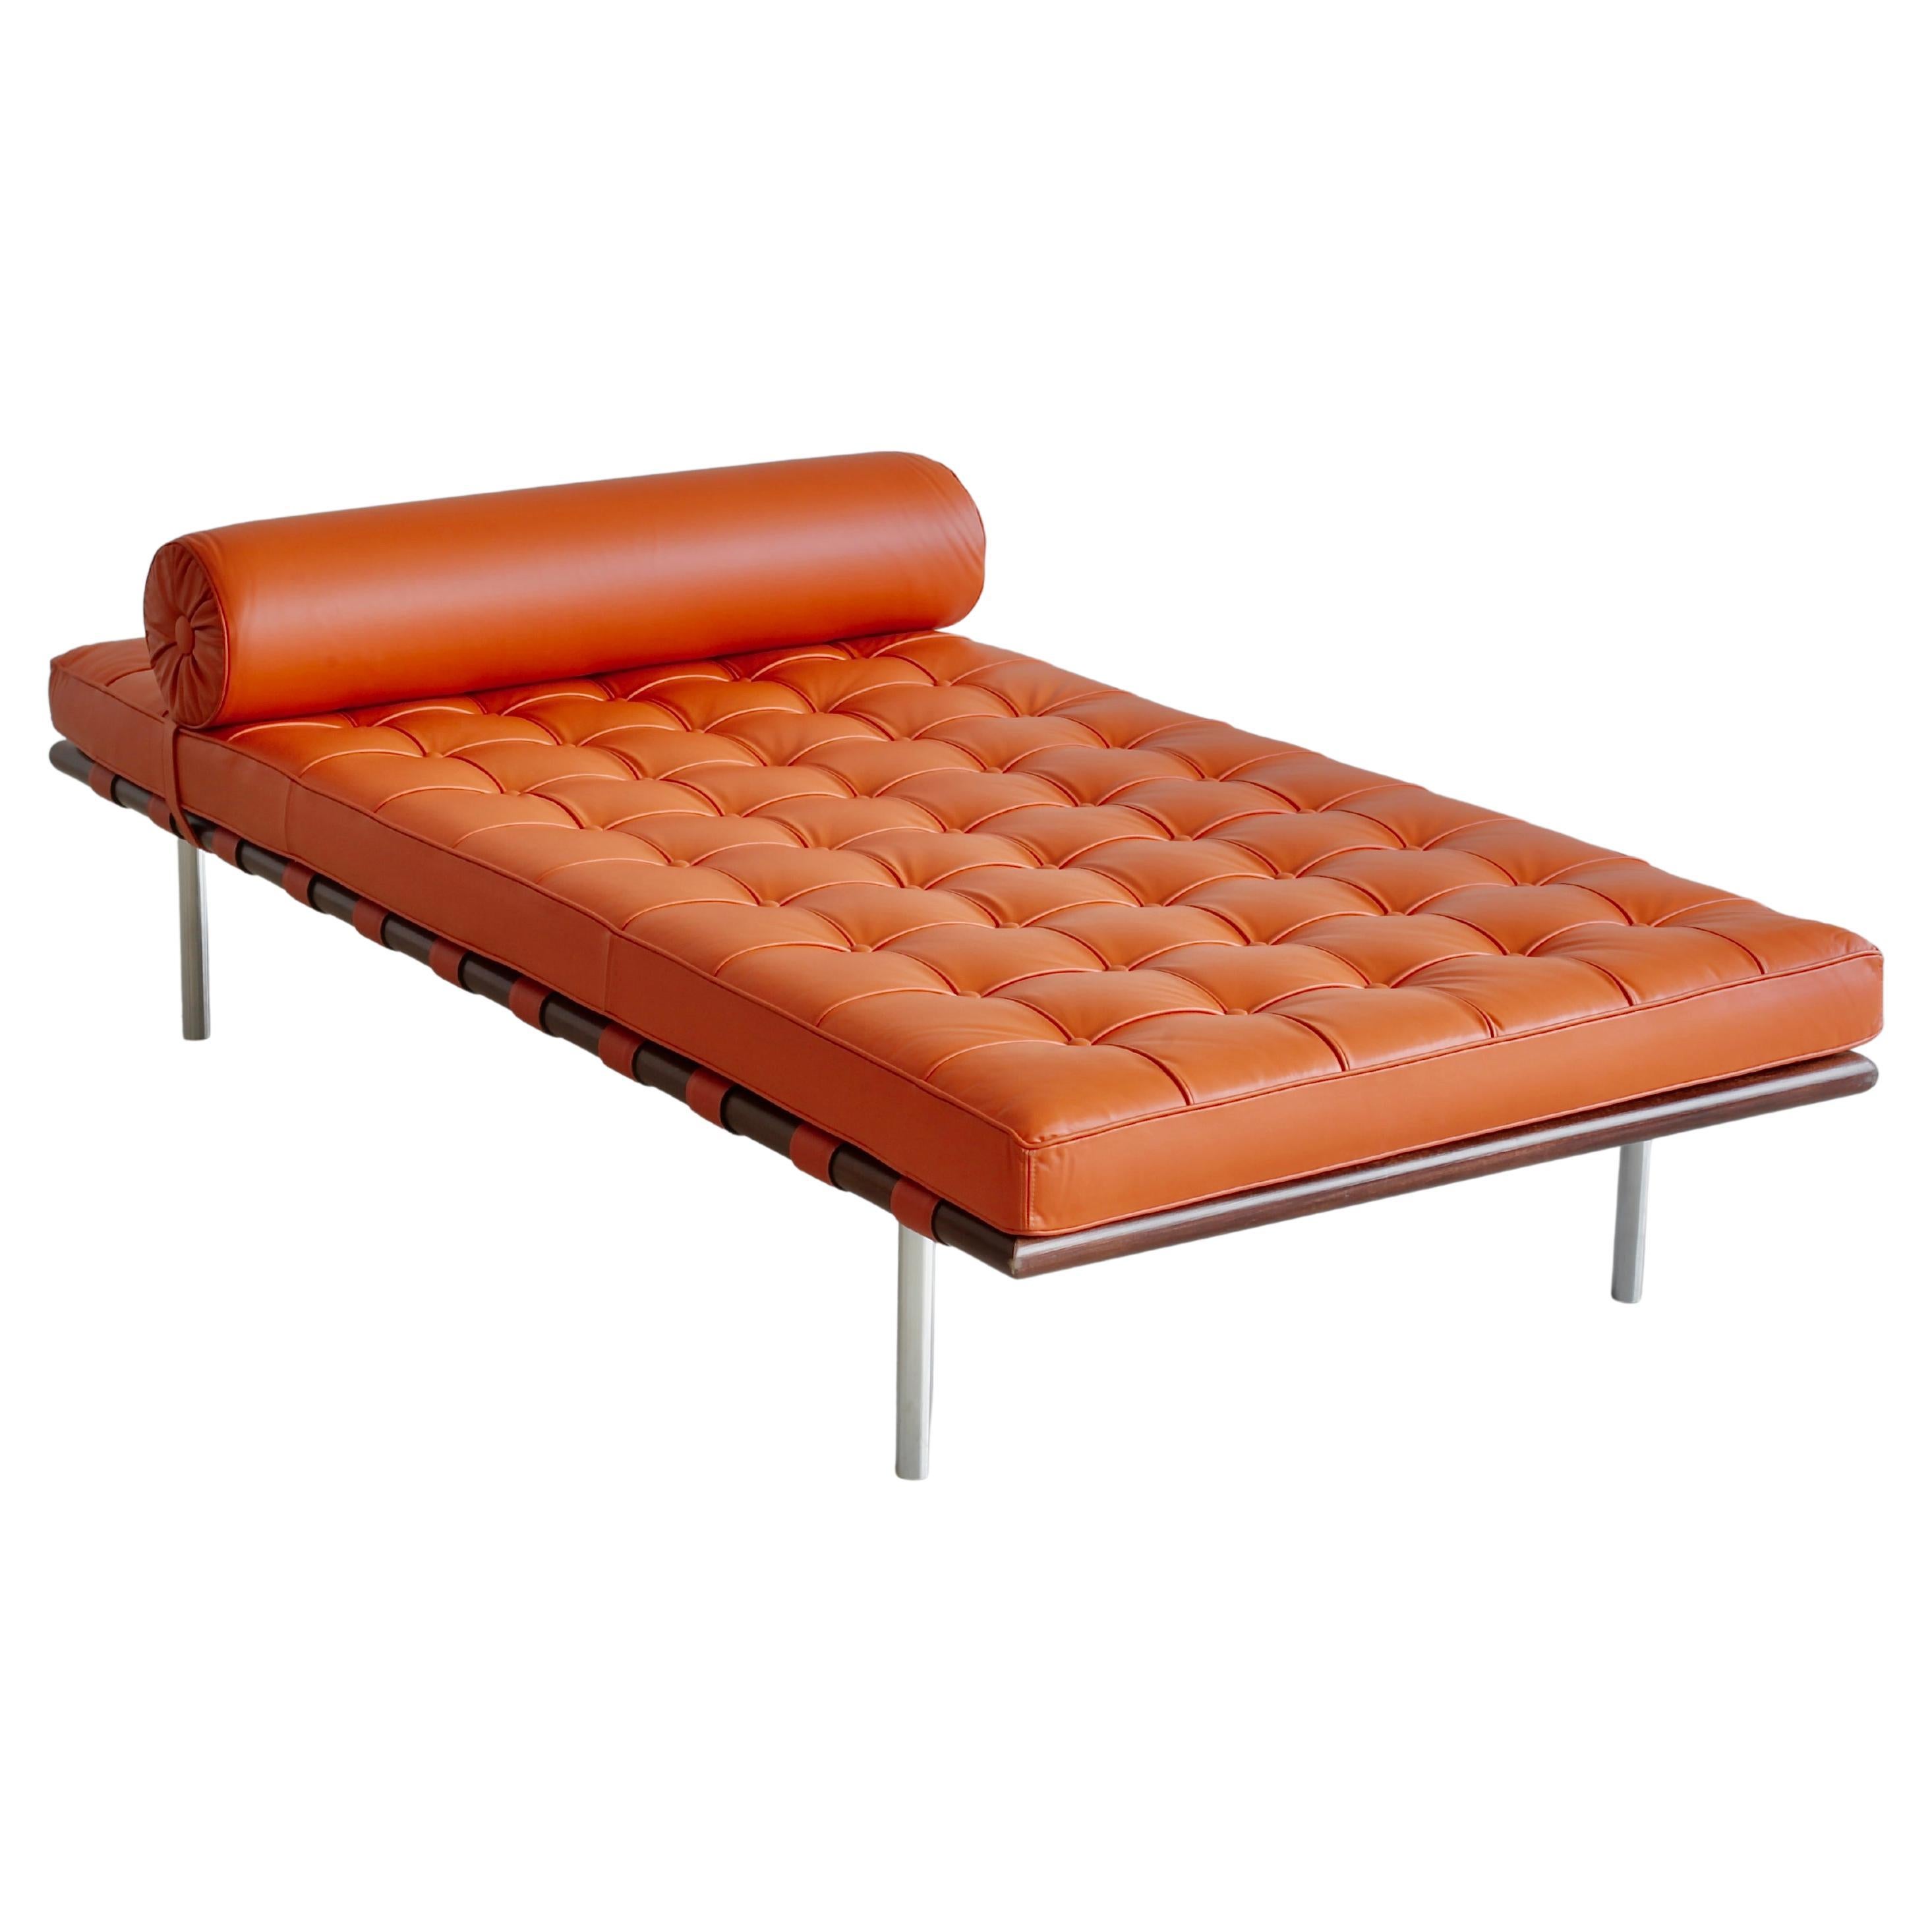 Daybed designed by Mies van der Rohe. U.S.A., Knoll International. For Sale